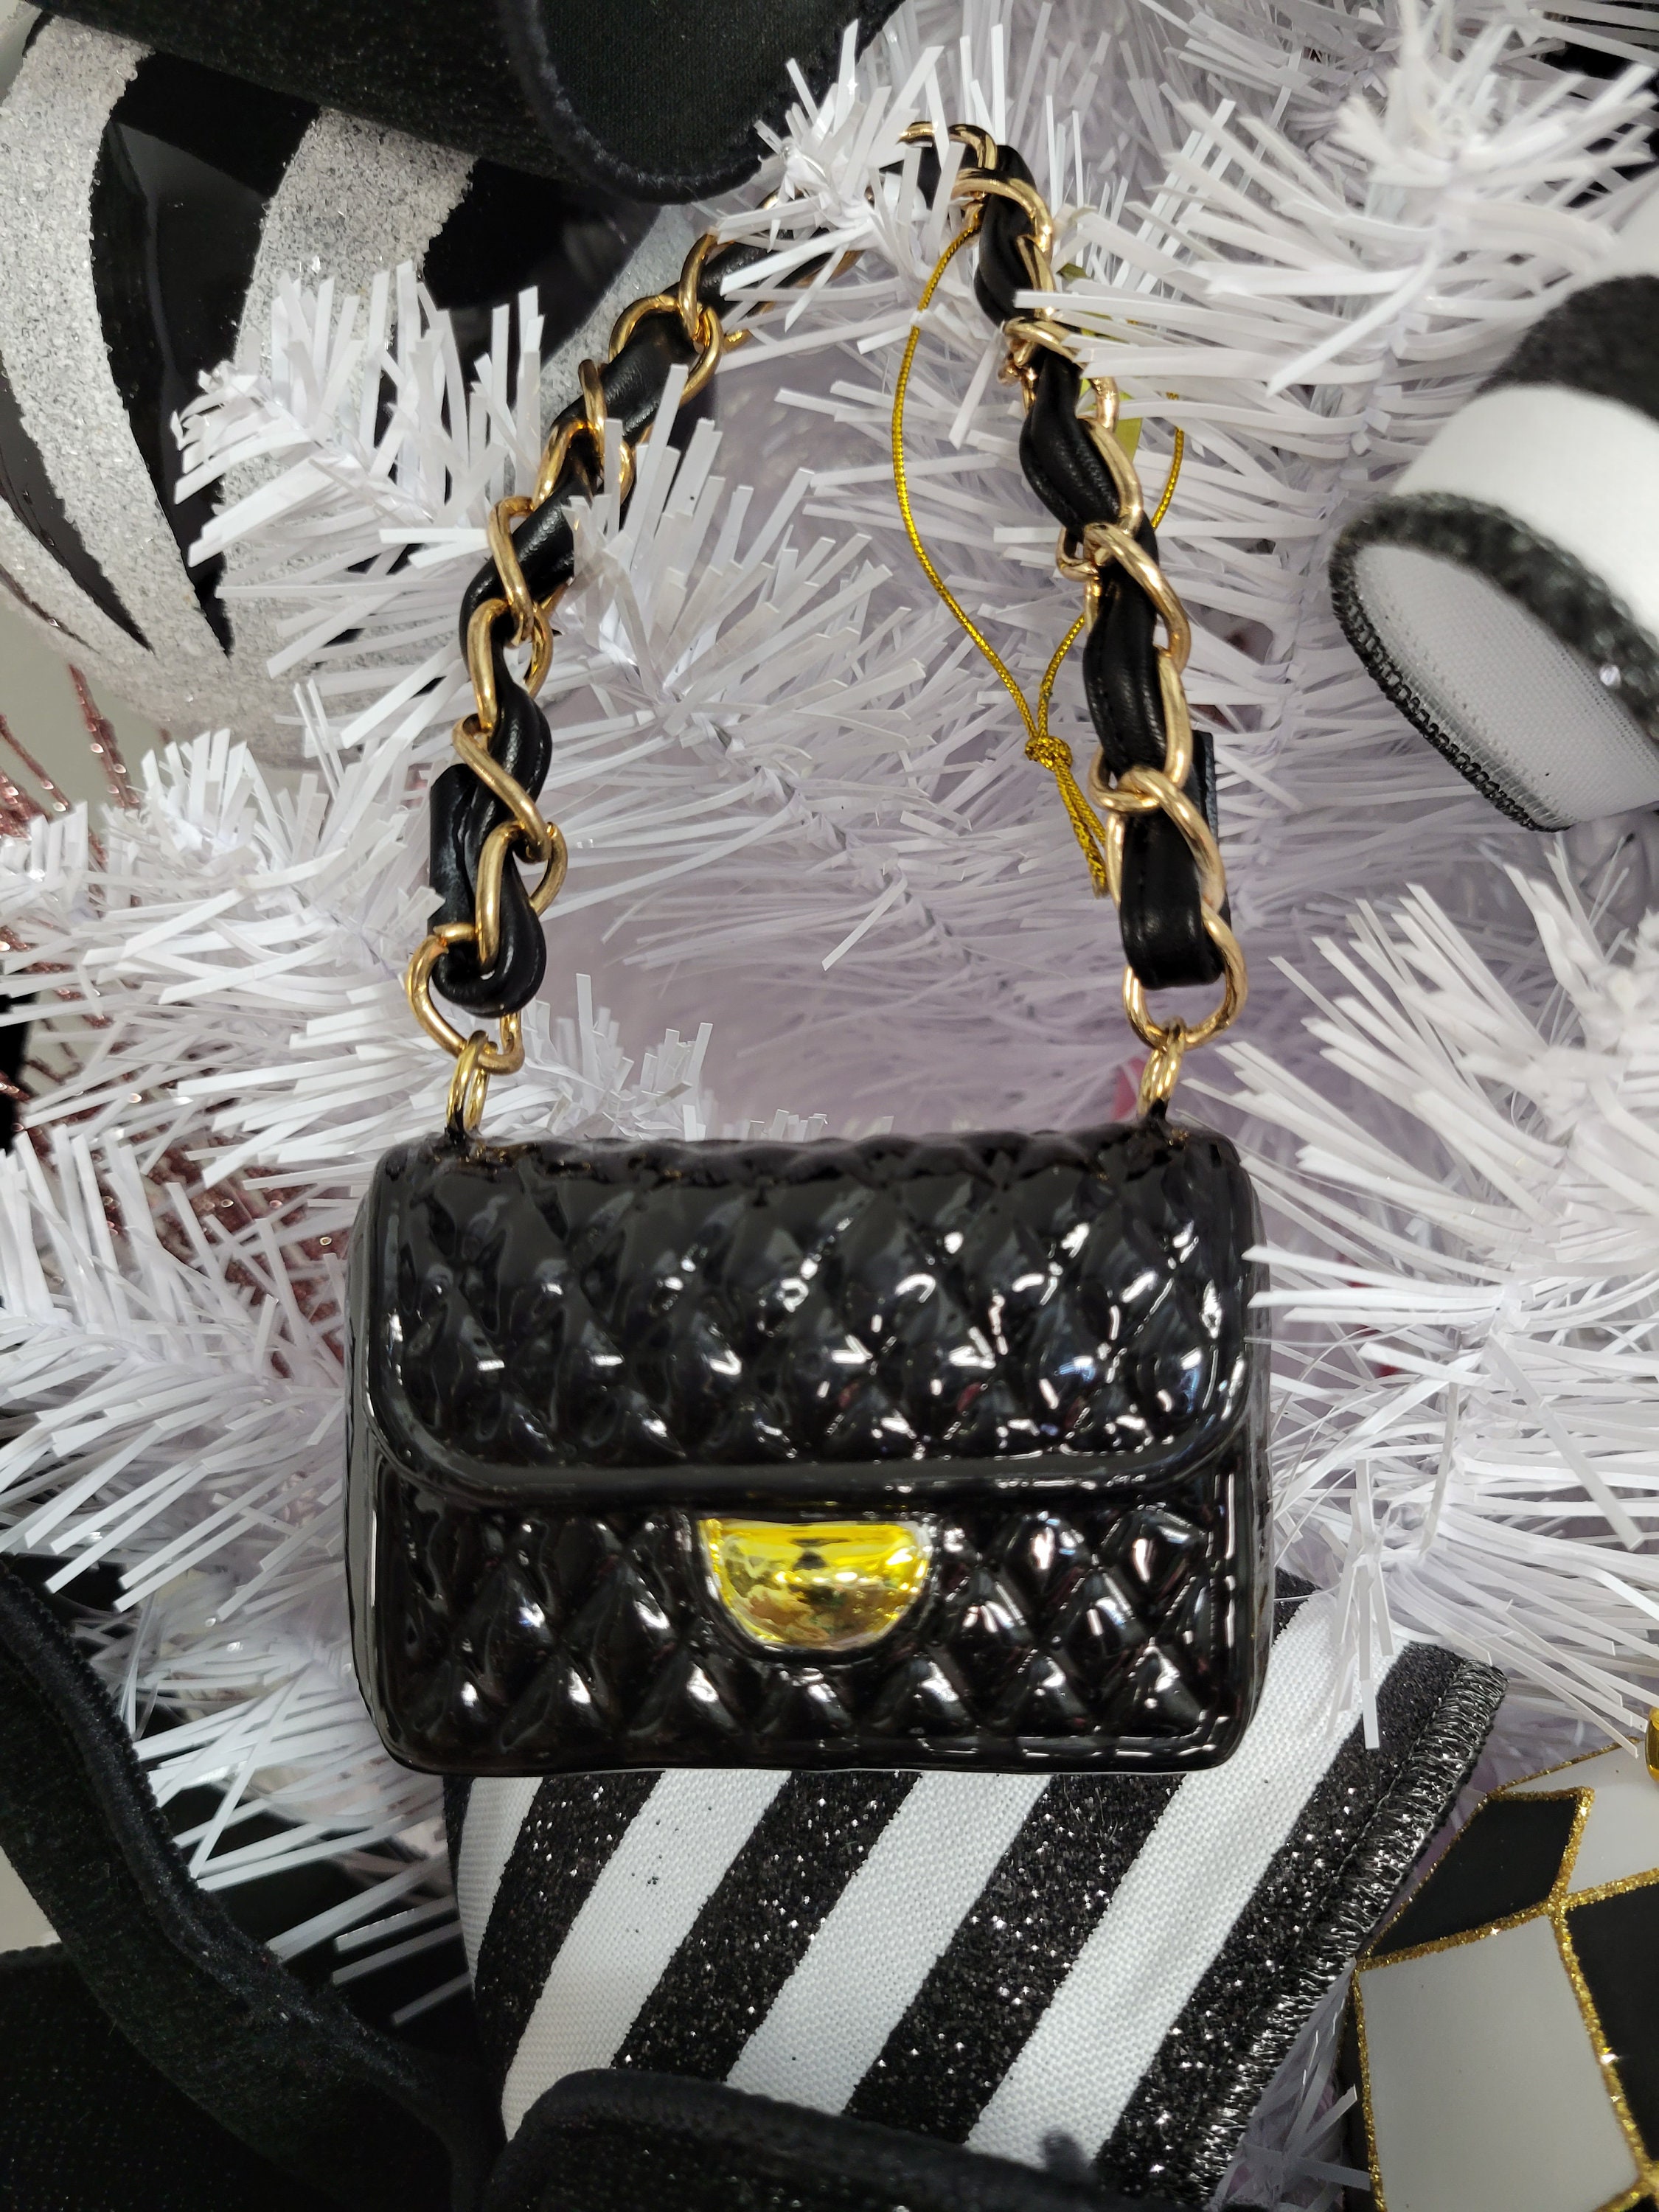 LOUIS VUITTON DECORATES CHRISTMAS with THIER ITEMS Editorial Stock Photo -  Image of finans, christmas: 134687593